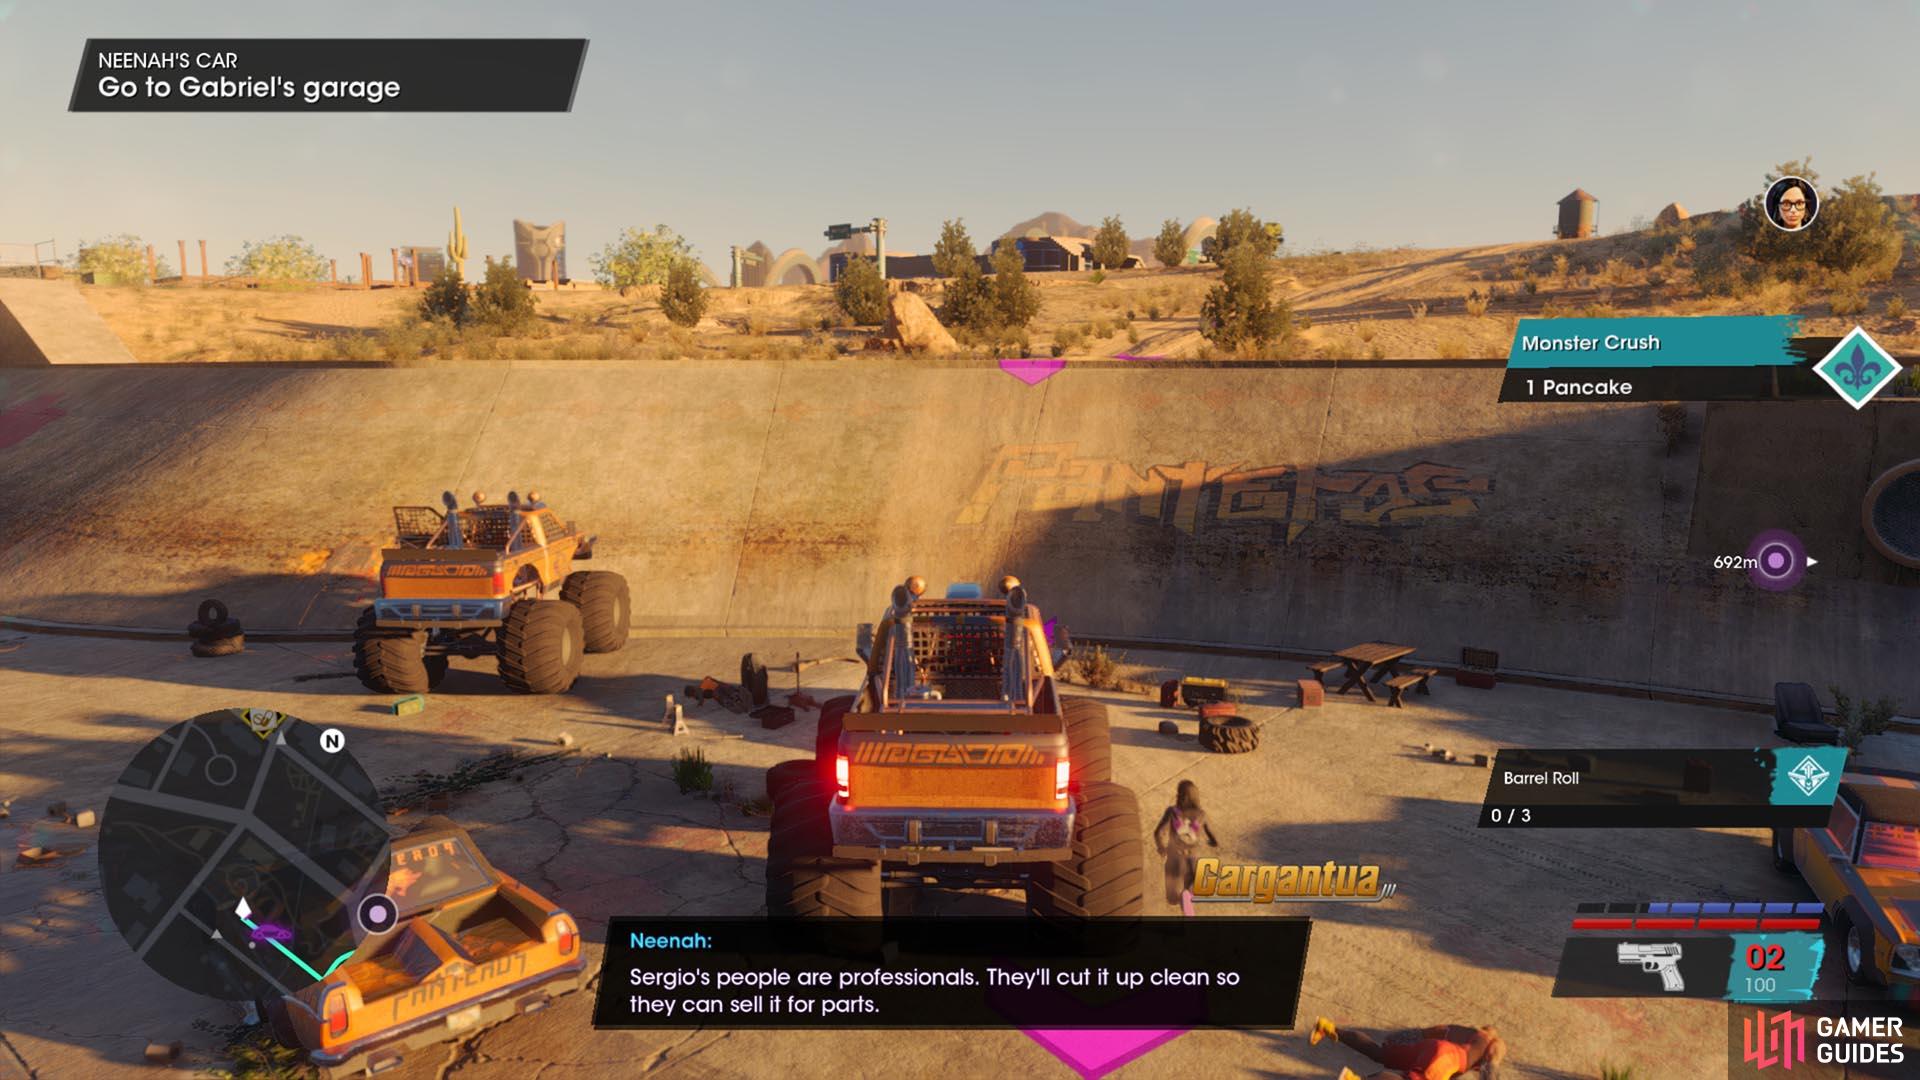 Once you have finished, jump in a monster truck and destroy their cars.